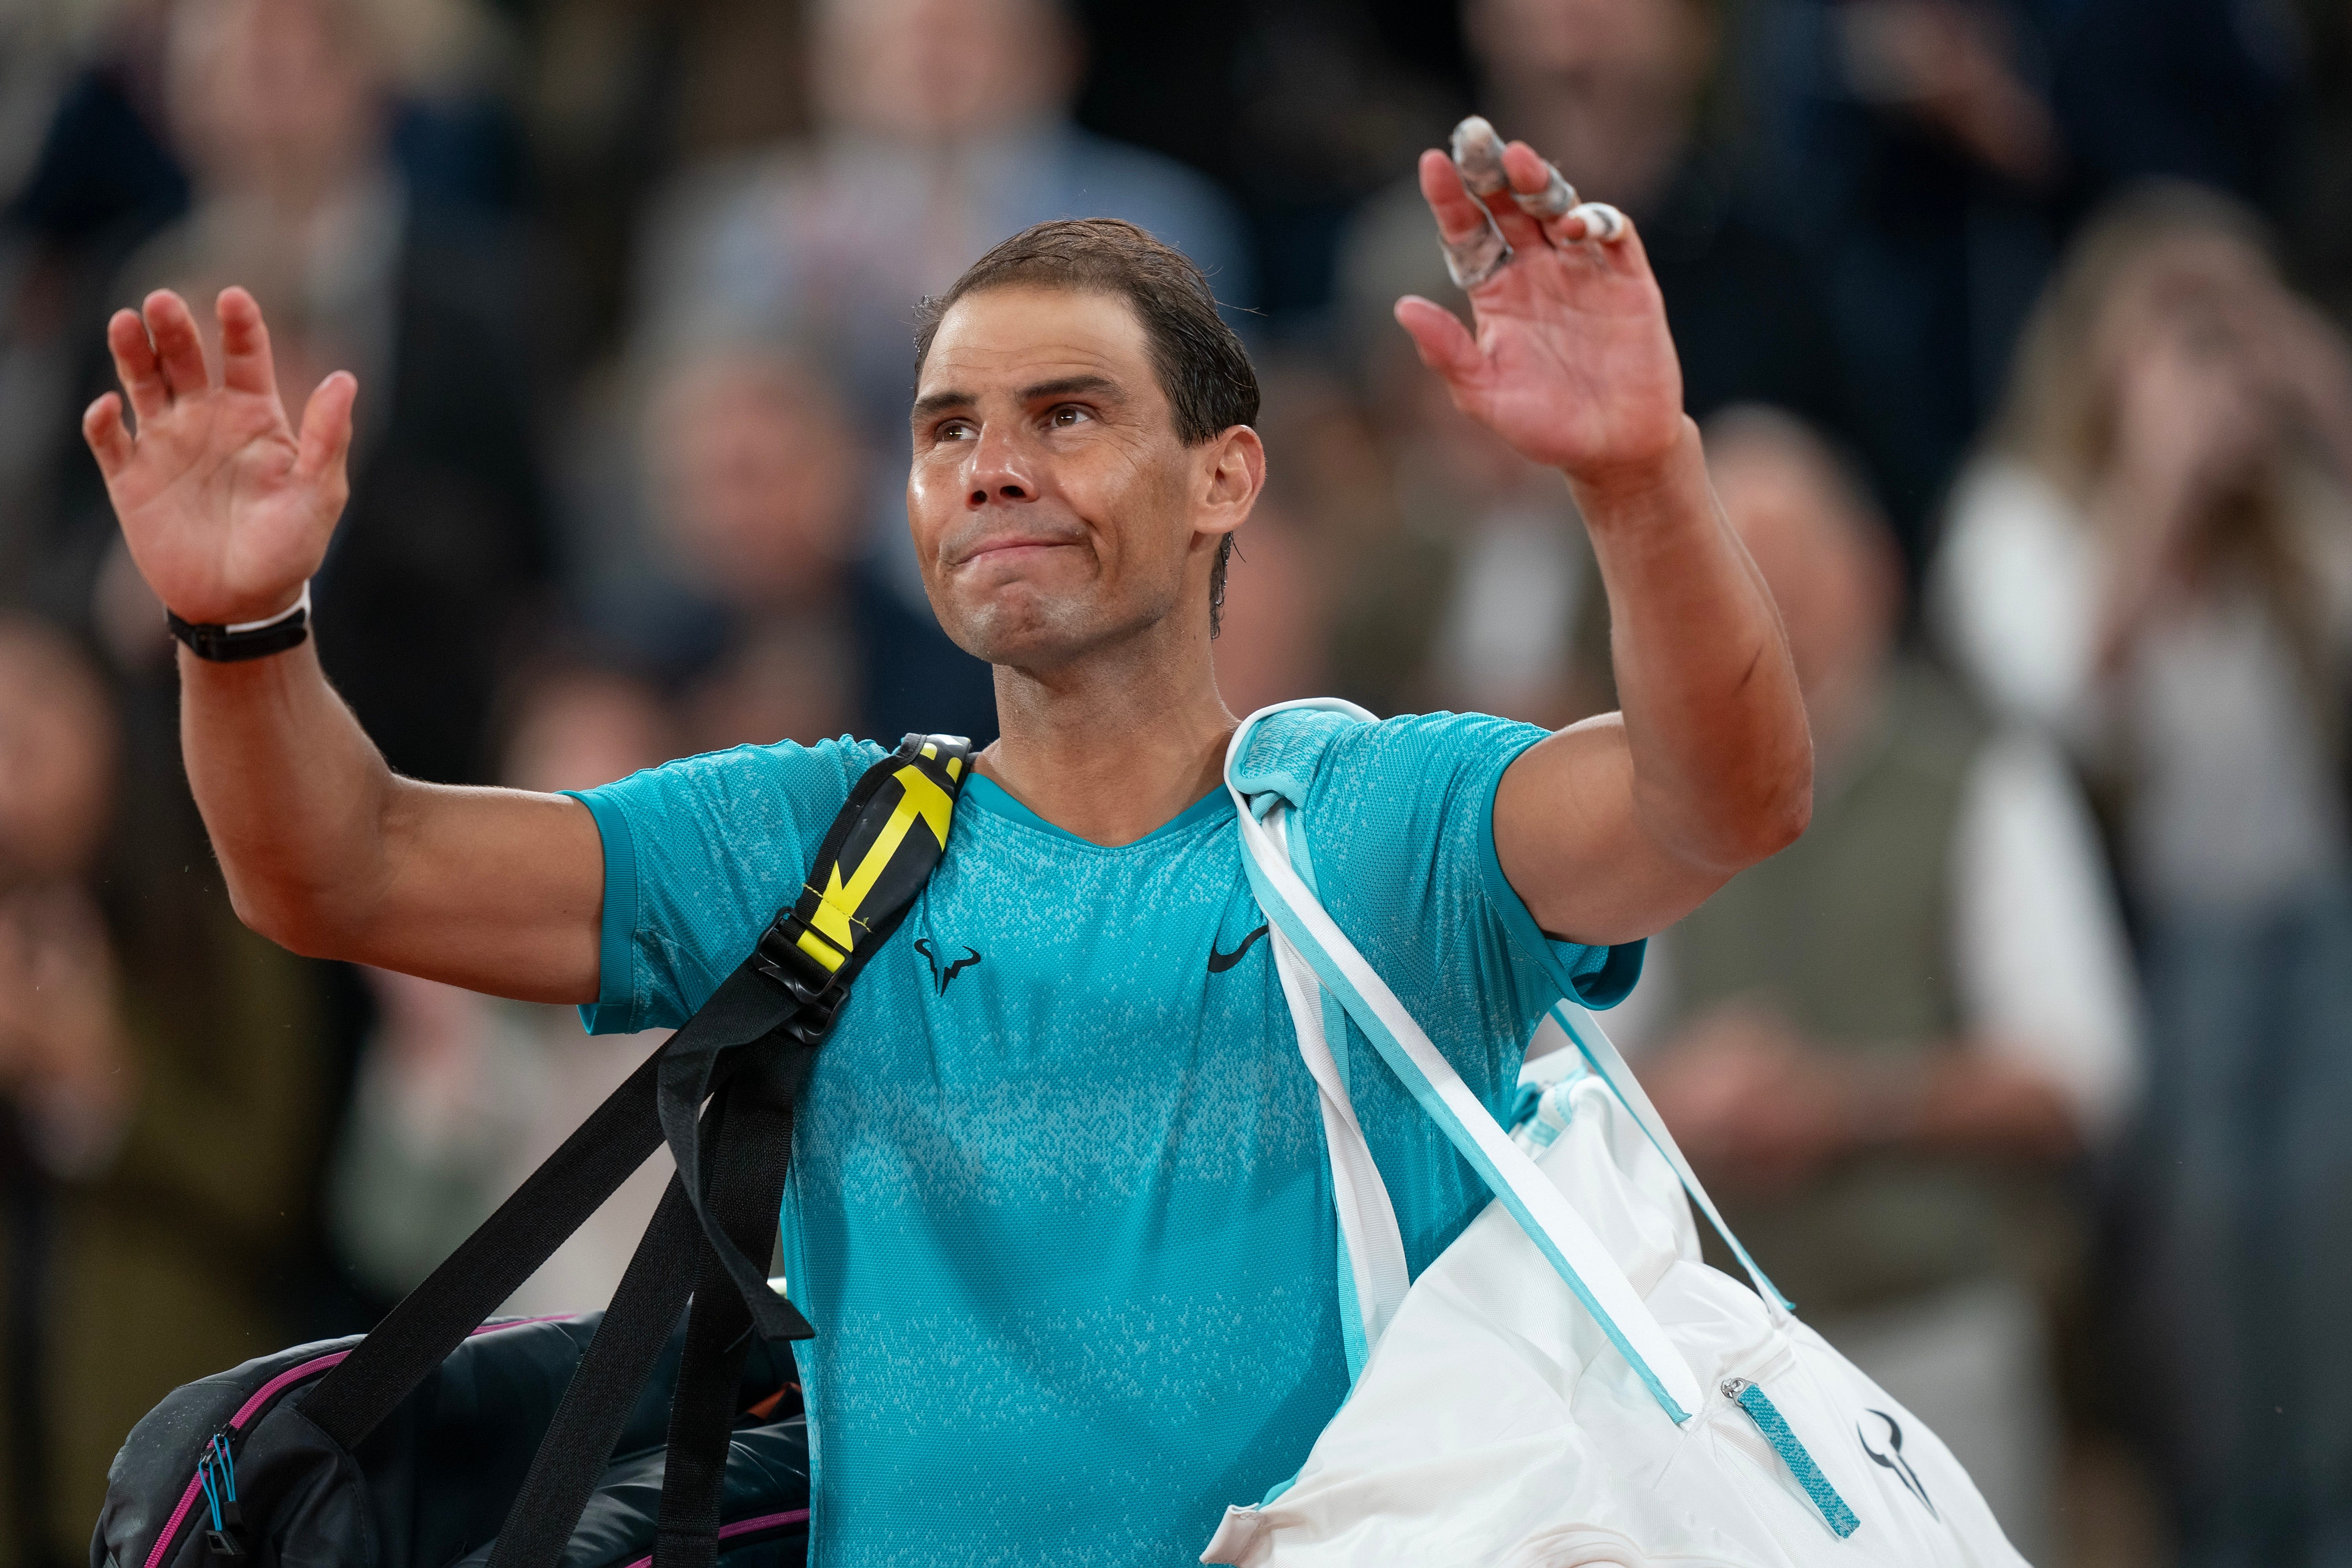 Rafael Nadal ousted in first round at French Open. Was this his last at Roland Garros?